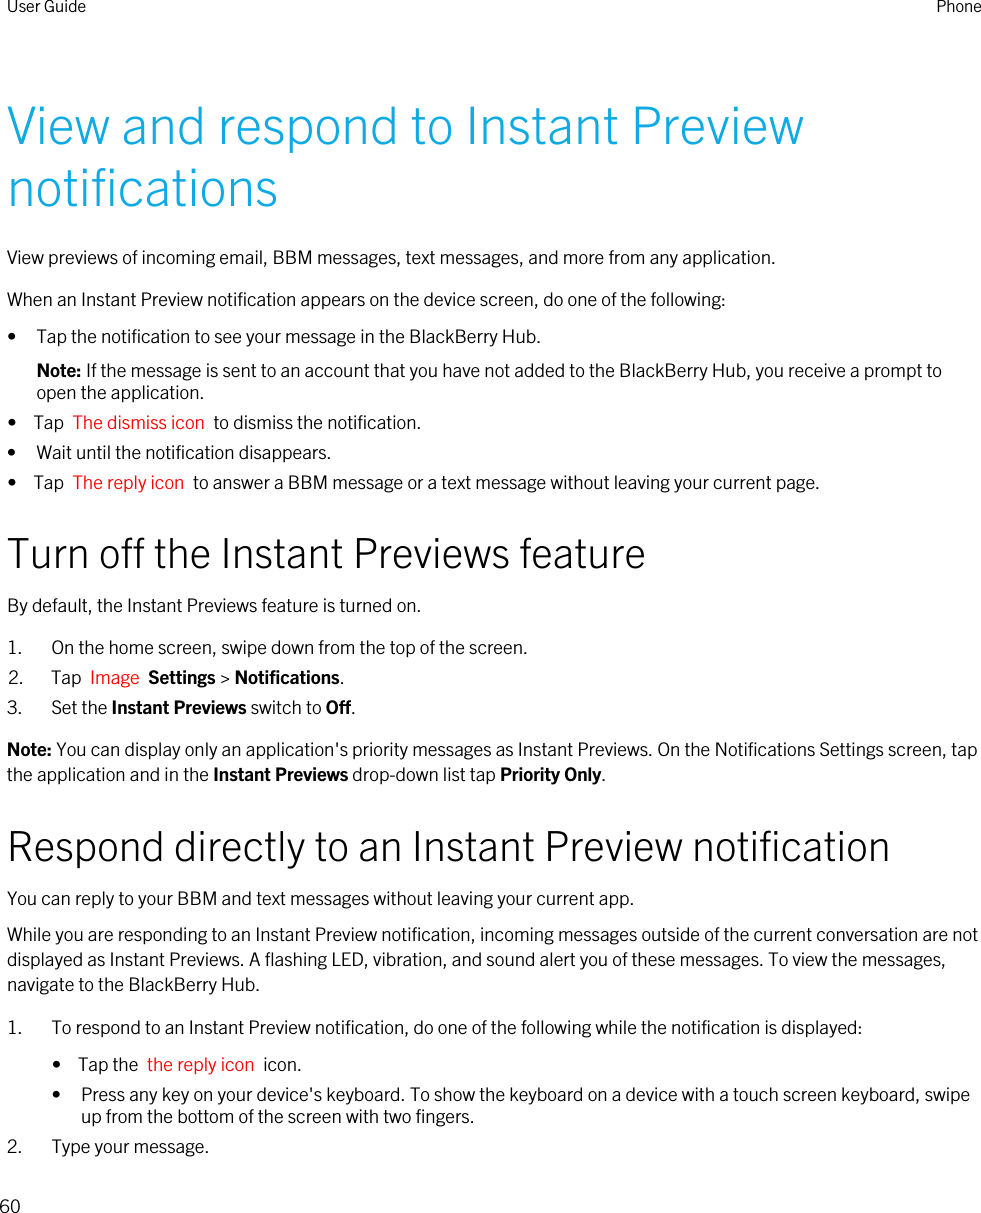 View and respond to Instant Preview notificationsView previews of incoming email, BBM messages, text messages, and more from any application.When an Instant Preview notification appears on the device screen, do one of the following:• Tap the notification to see your message in the BlackBerry Hub.Note: If the message is sent to an account that you have not added to the BlackBerry Hub, you receive a prompt to open the application.•  Tap  The dismiss icon  to dismiss the notification.• Wait until the notification disappears.•  Tap  The reply icon  to answer a BBM message or a text message without leaving your current page.Turn off the Instant Previews featureBy default, the Instant Previews feature is turned on.1. On the home screen, swipe down from the top of the screen.2. Tap  Image  Settings &gt; Notifications.3. Set the Instant Previews switch to Off.Note: You can display only an application&apos;s priority messages as Instant Previews. On the Notifications Settings screen, tap the application and in the Instant Previews drop-down list tap Priority Only.Respond directly to an Instant Preview notificationYou can reply to your BBM and text messages without leaving your current app.While you are responding to an Instant Preview notification, incoming messages outside of the current conversation are not displayed as Instant Previews. A flashing LED, vibration, and sound alert you of these messages. To view the messages, navigate to the BlackBerry Hub.1. To respond to an Instant Preview notification, do one of the following while the notification is displayed:•  Tap the  the reply icon  icon.• Press any key on your device&apos;s keyboard. To show the keyboard on a device with a touch screen keyboard, swipe up from the bottom of the screen with two fingers.2. Type your message.User Guide Phone60